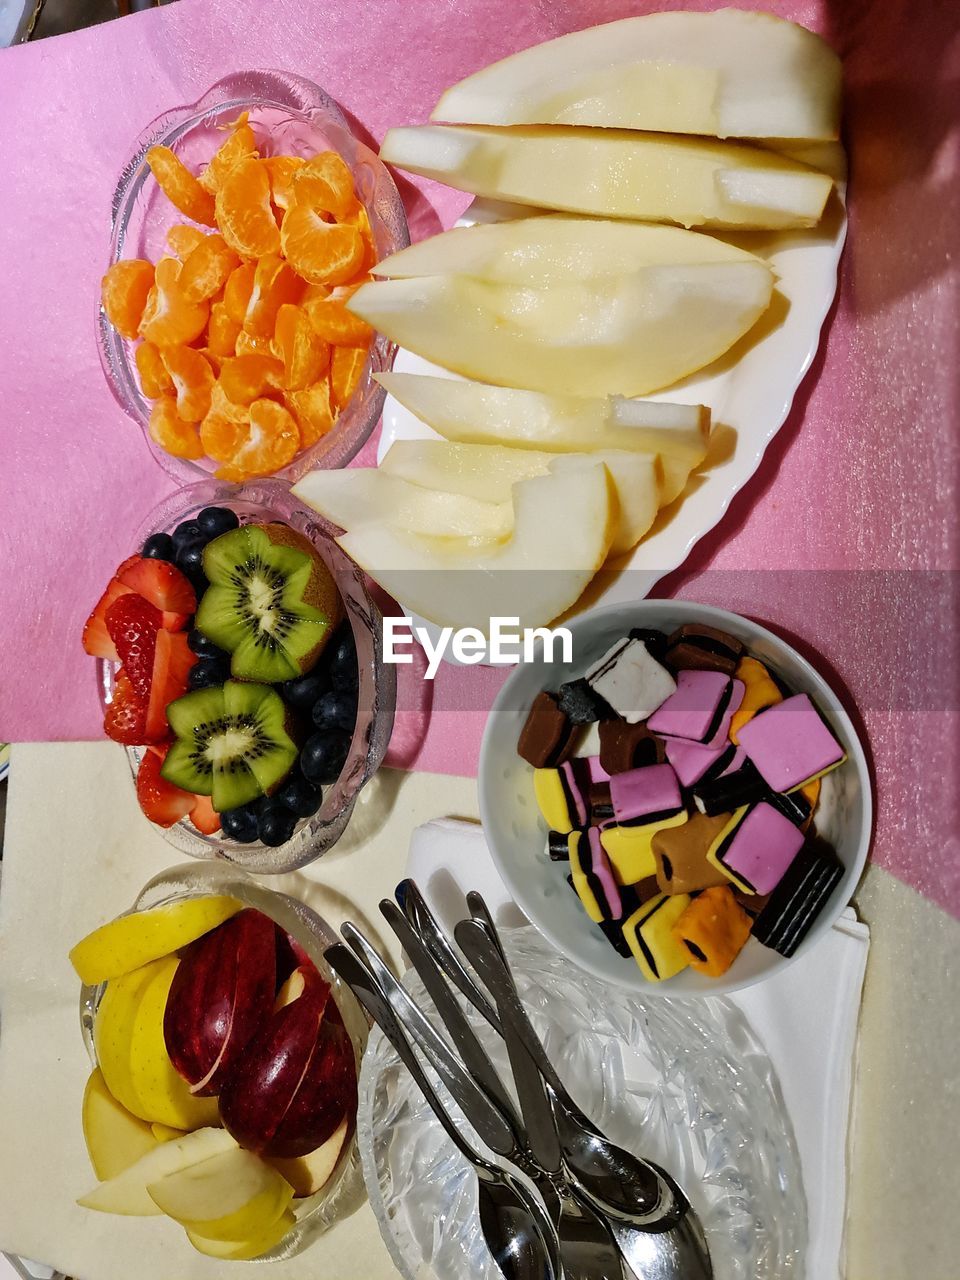 Obst und Sweets Flower Multi Colored Plate Fruit Directly Above Variation SLICE High Angle View Close-up Food And Drink Sashimi  Japanese Food Passion Fruit Kiwi - Fruit Gelatin Dessert Tuna Salmon - Seafood Salmon Pitaya Sushi